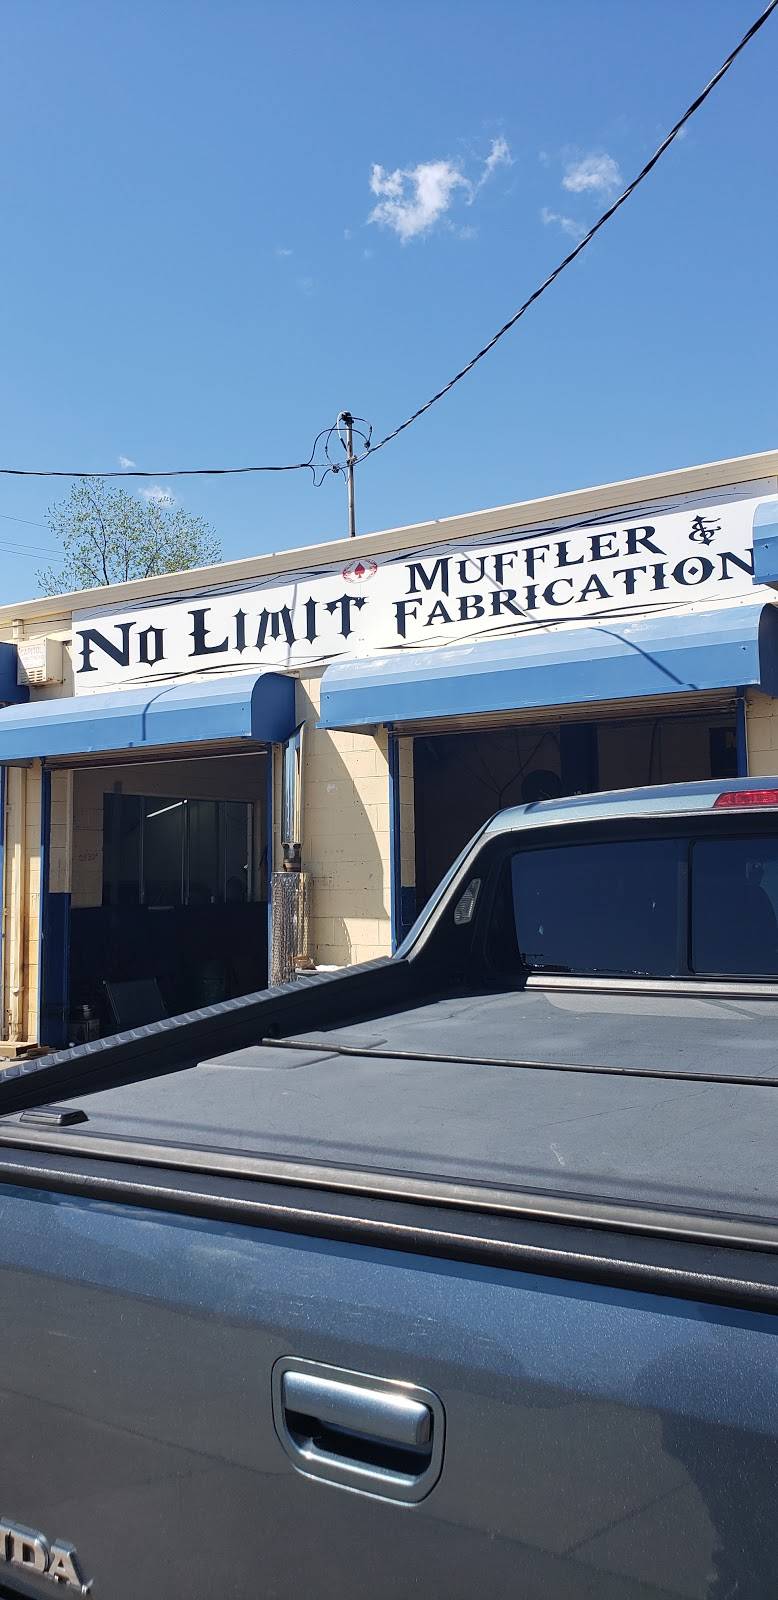 No Limit Muffler and Fabrication | 330 Riverside Ave, Roseville, CA 95678 | Phone: (916) 773-7600